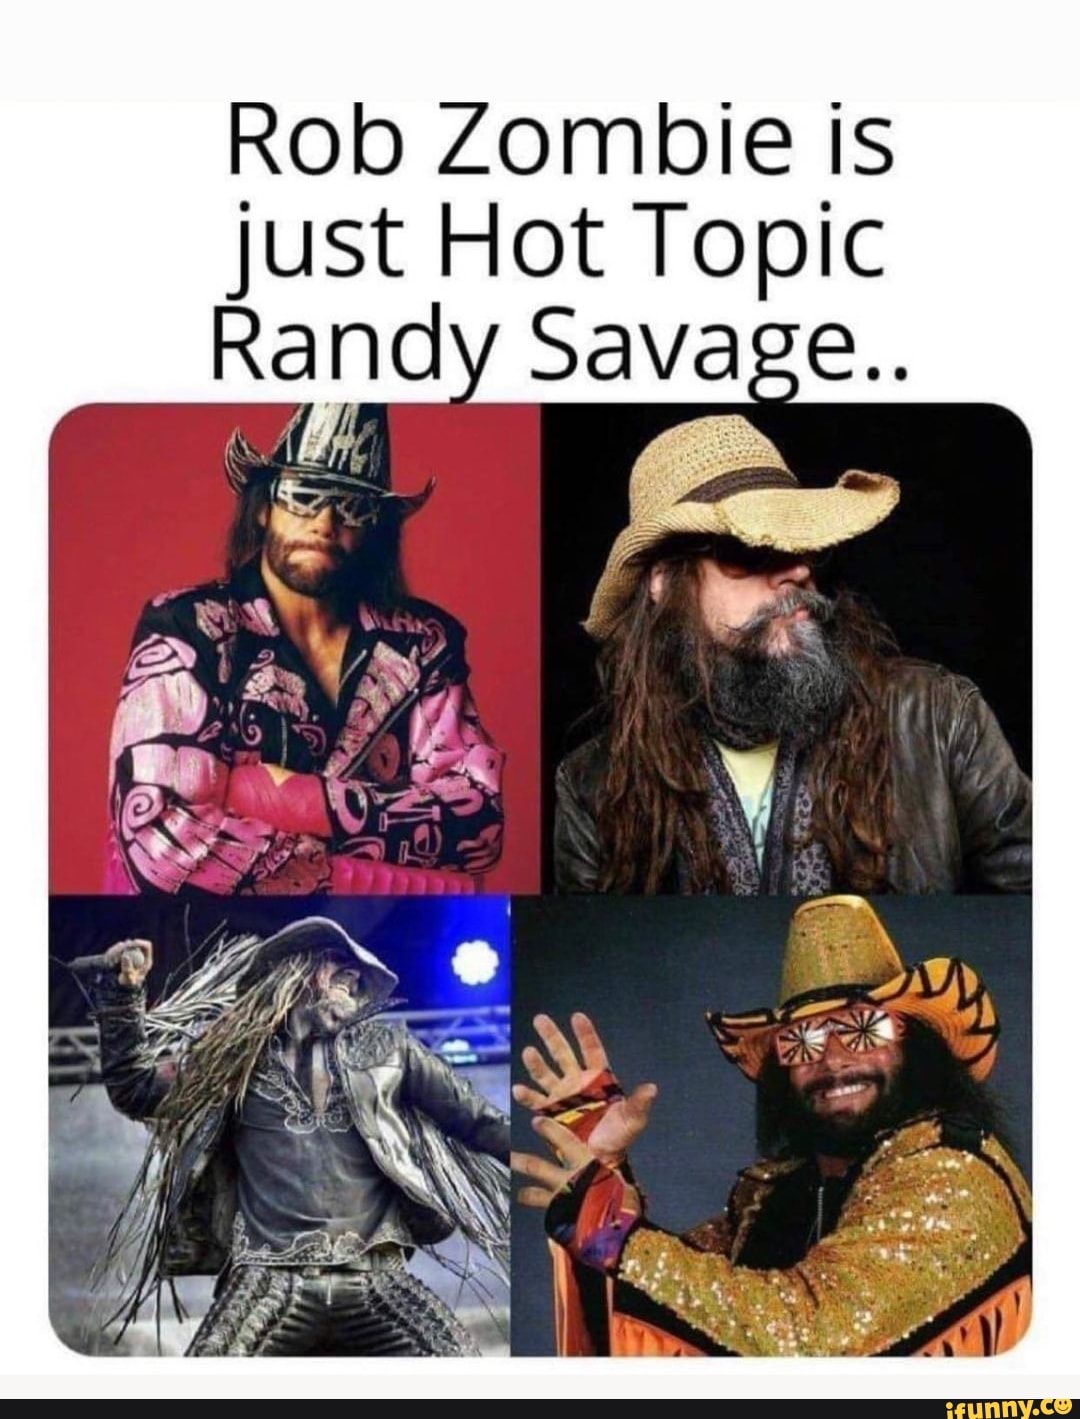 Rob Zombie is just Hot Topic Randy Savage. 